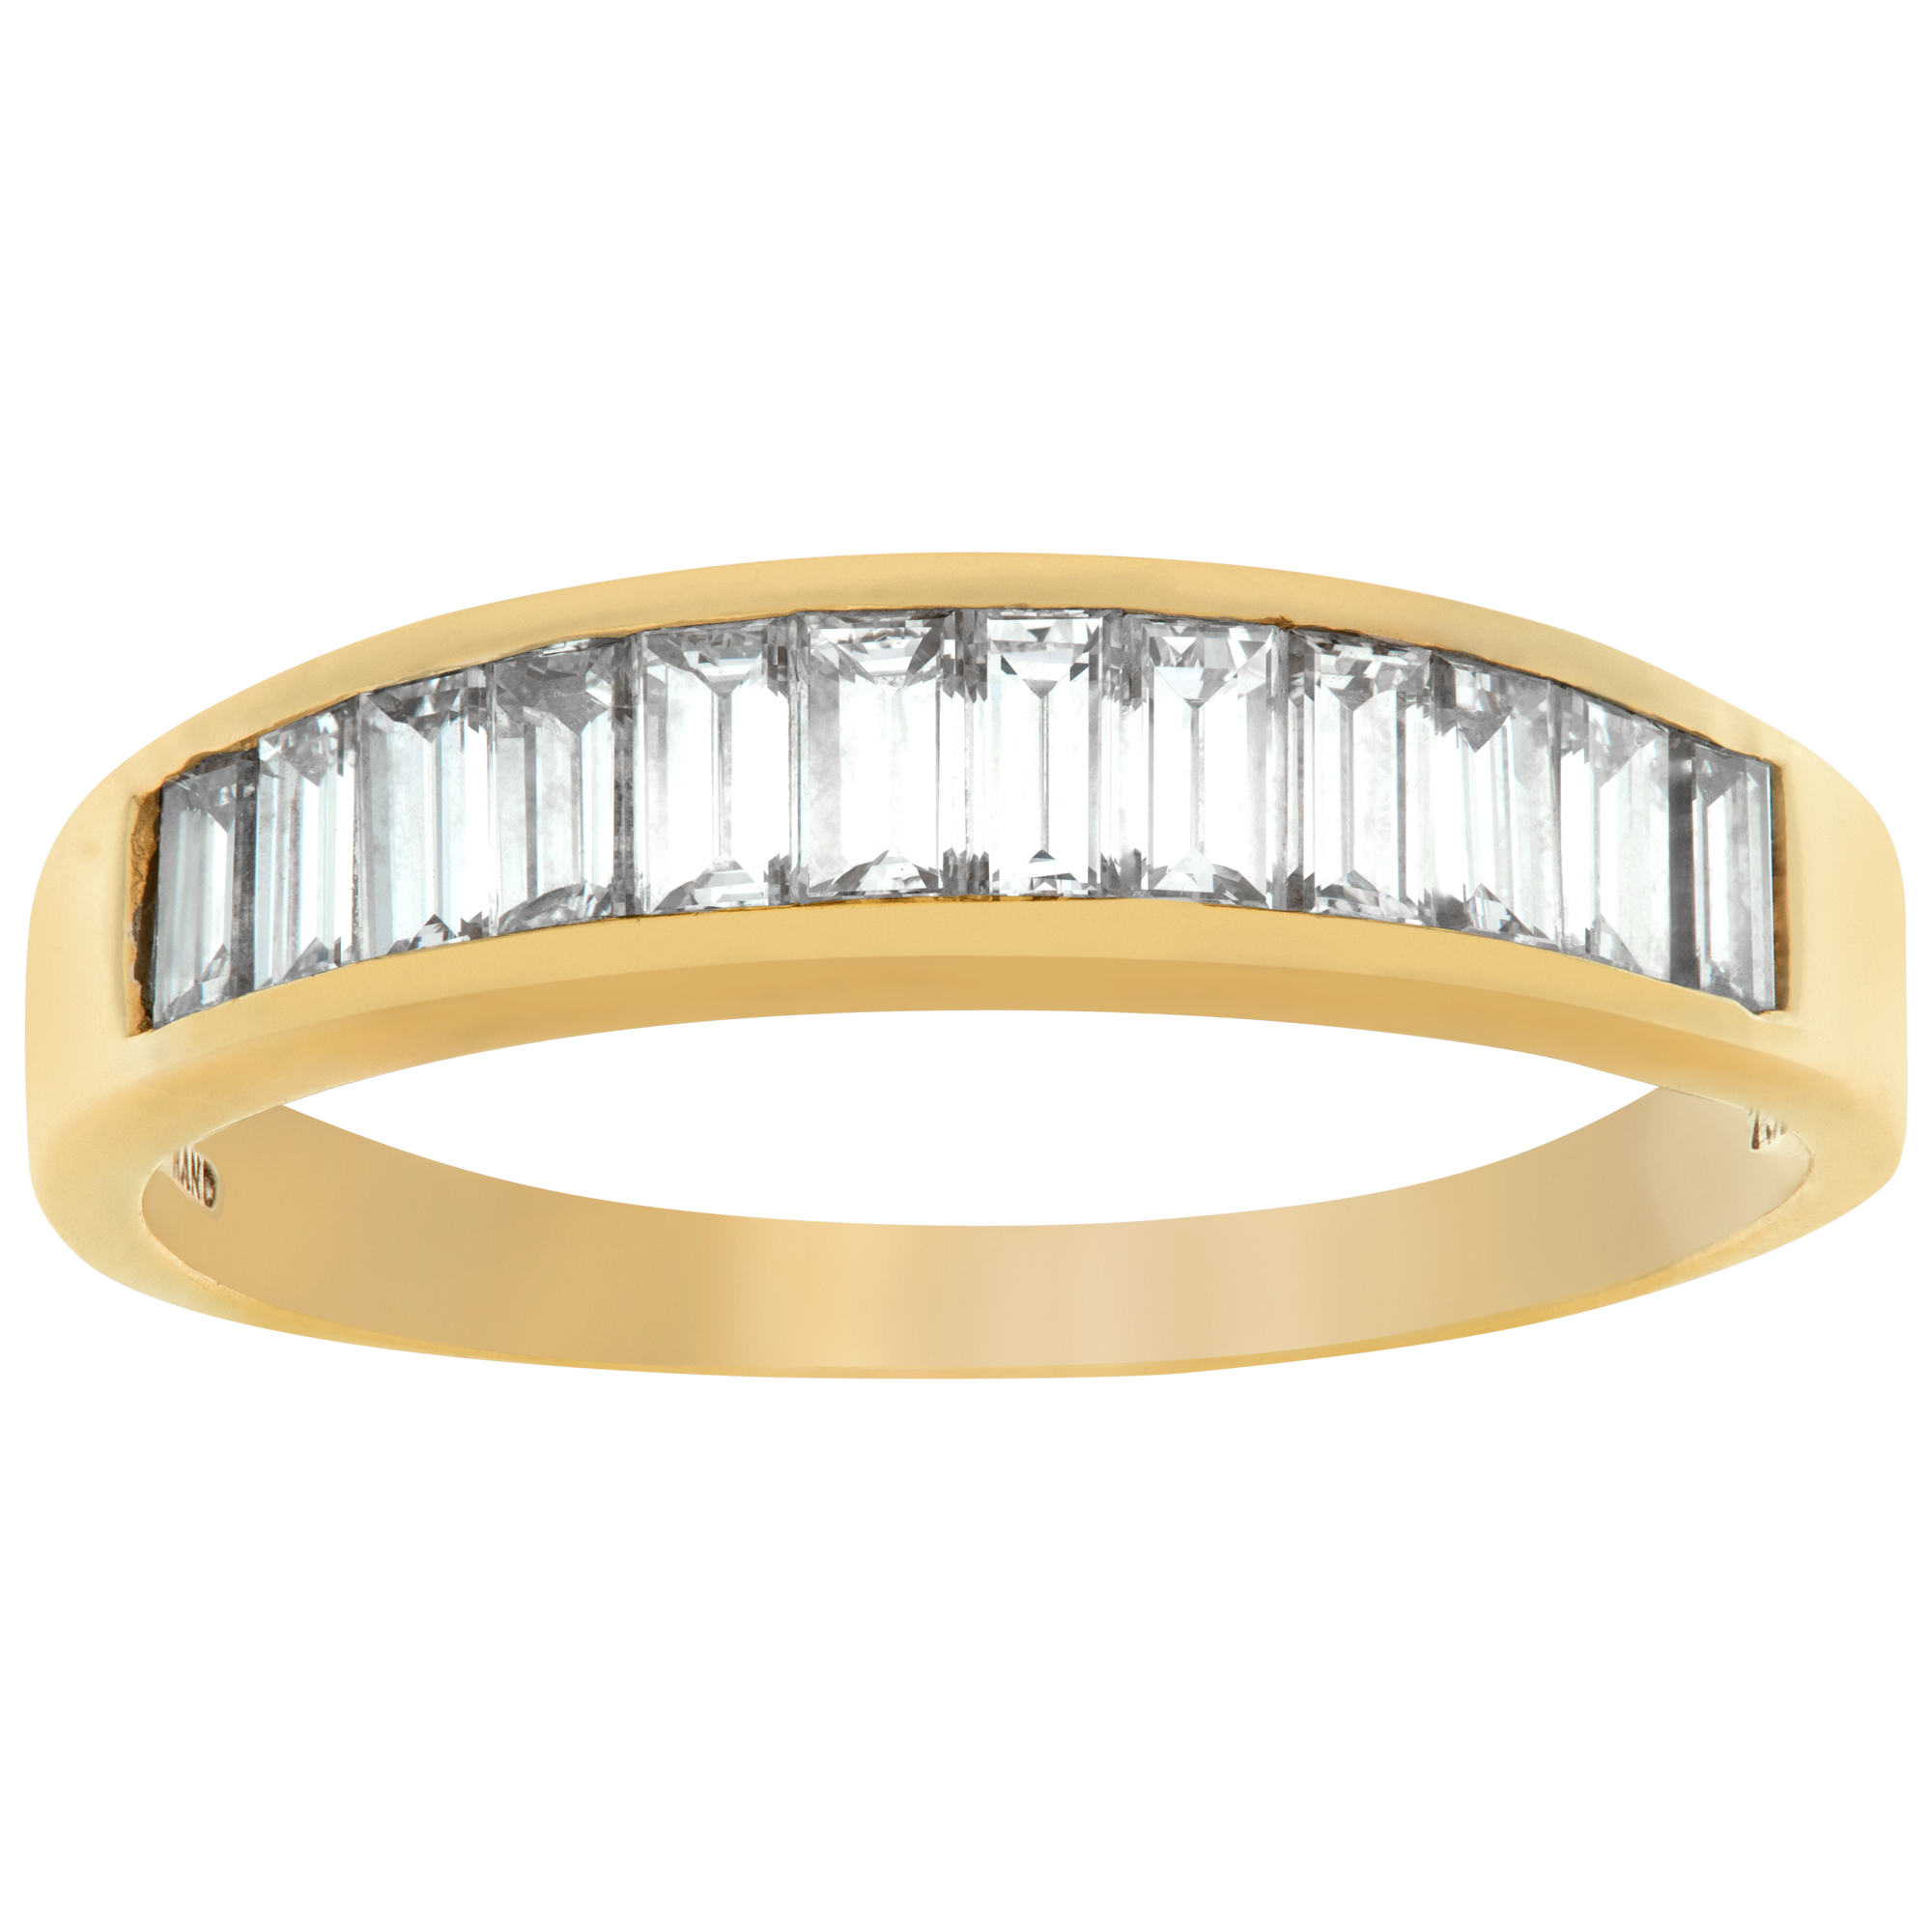 Mens 18k Yellow Gold Diamond Wedding Band With Approxiamtely 1.65 Carats